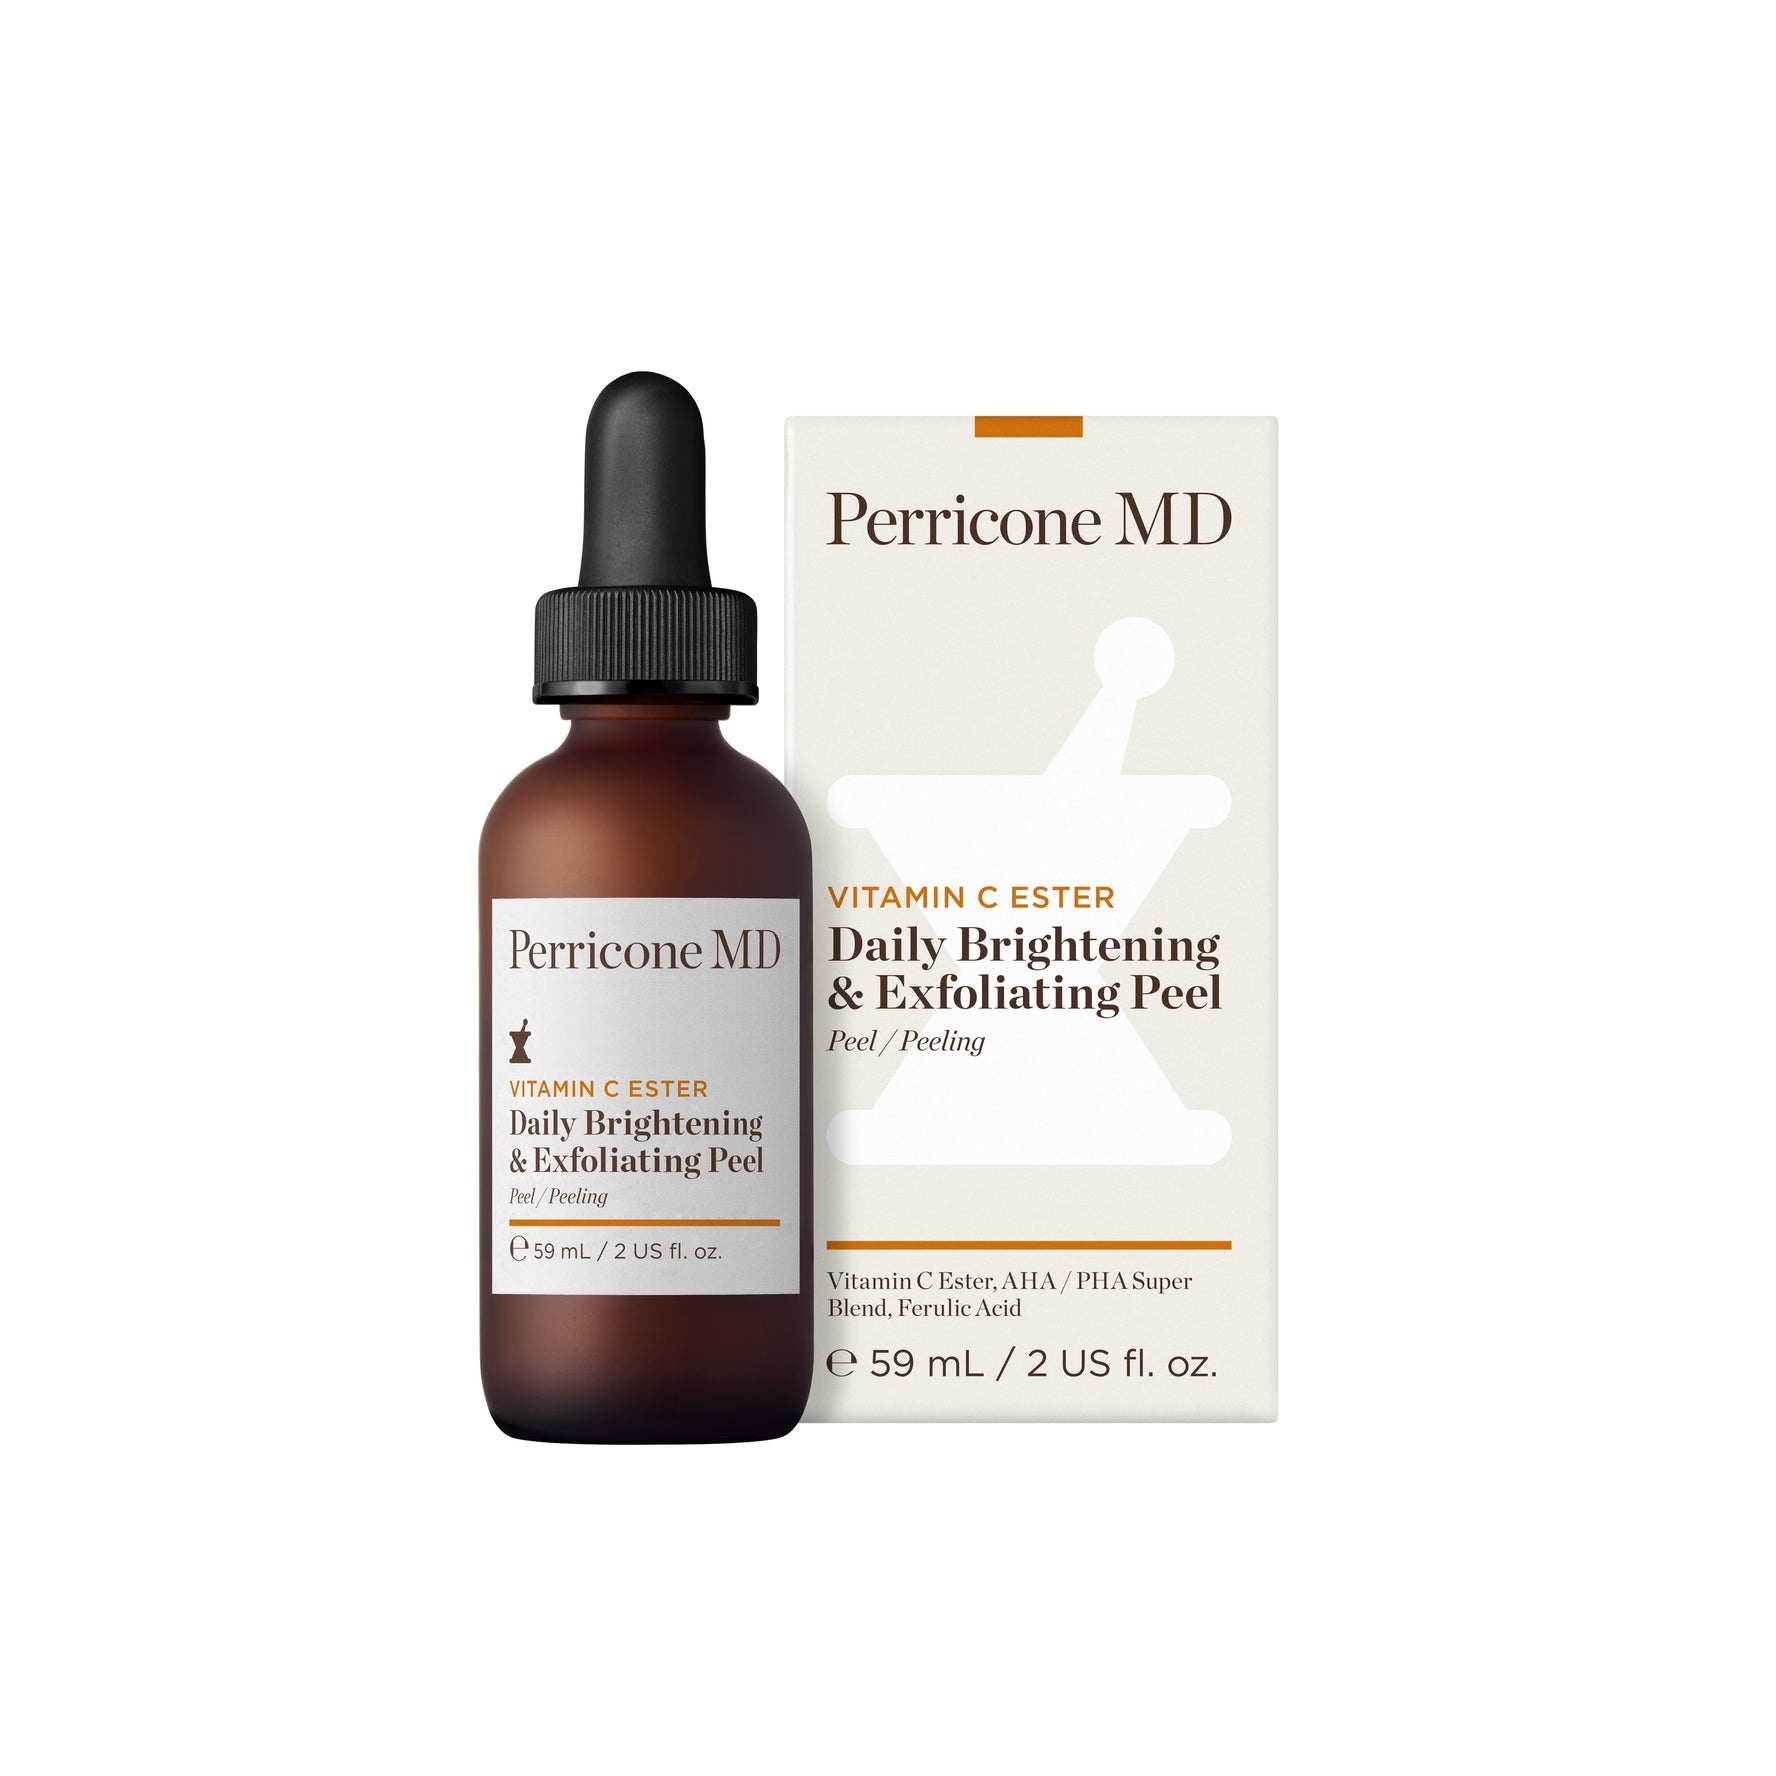 Perricone MD Vitamin C Ester Daily Brightening and exfolianting Peel (59ml)